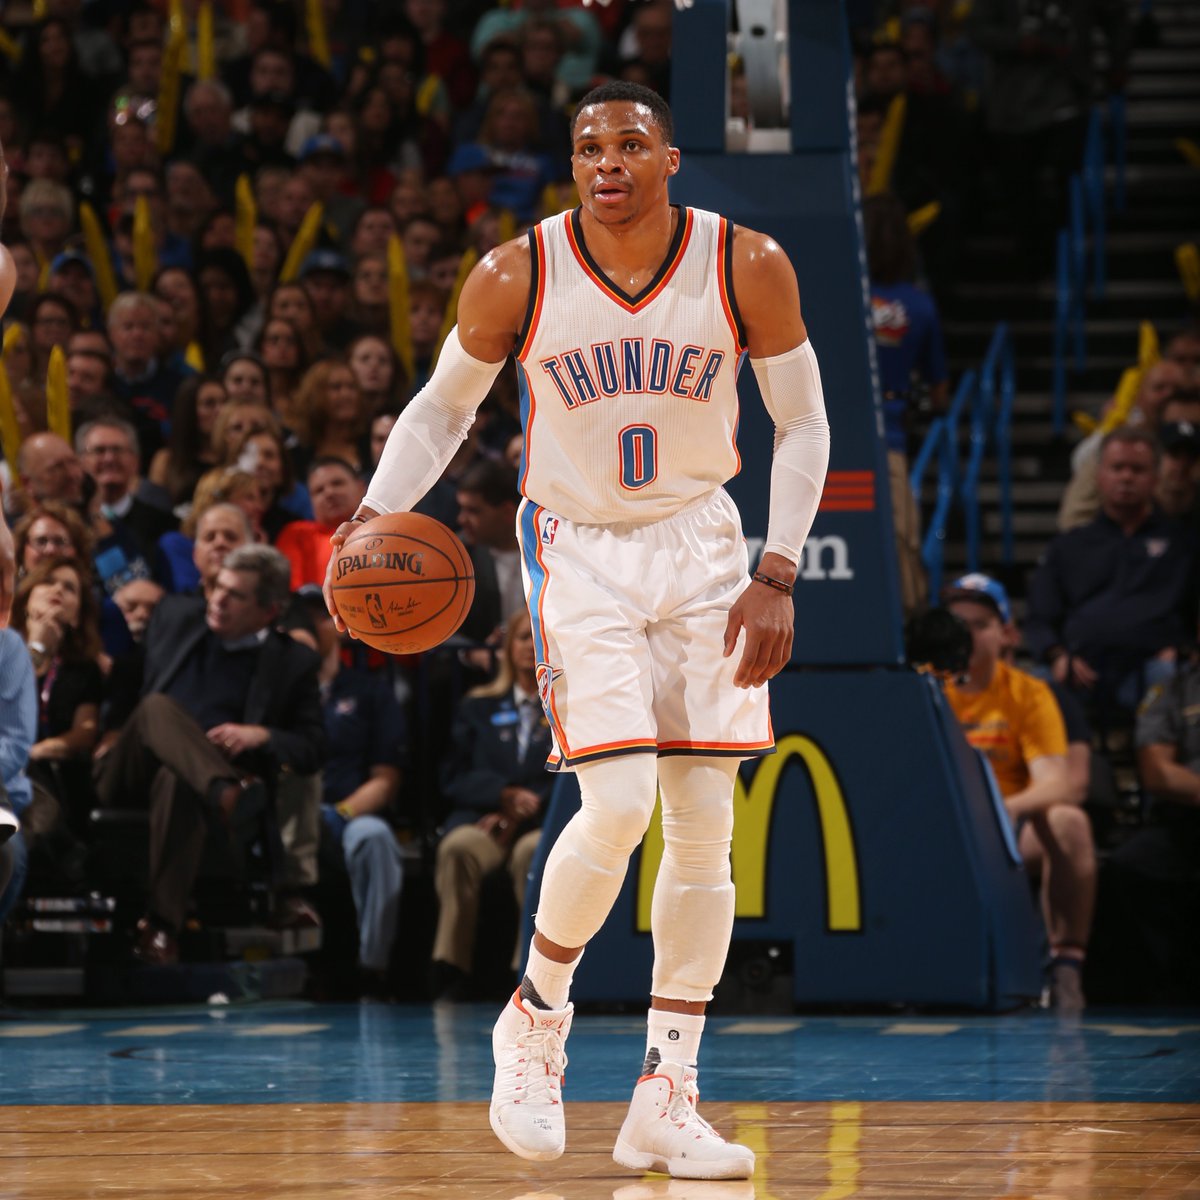 Shai Gilgeous-Alexander is the first Thunder player since Russell Westbrook (171 in 2016-17) to total 150+ points through the first 5 games of the season.